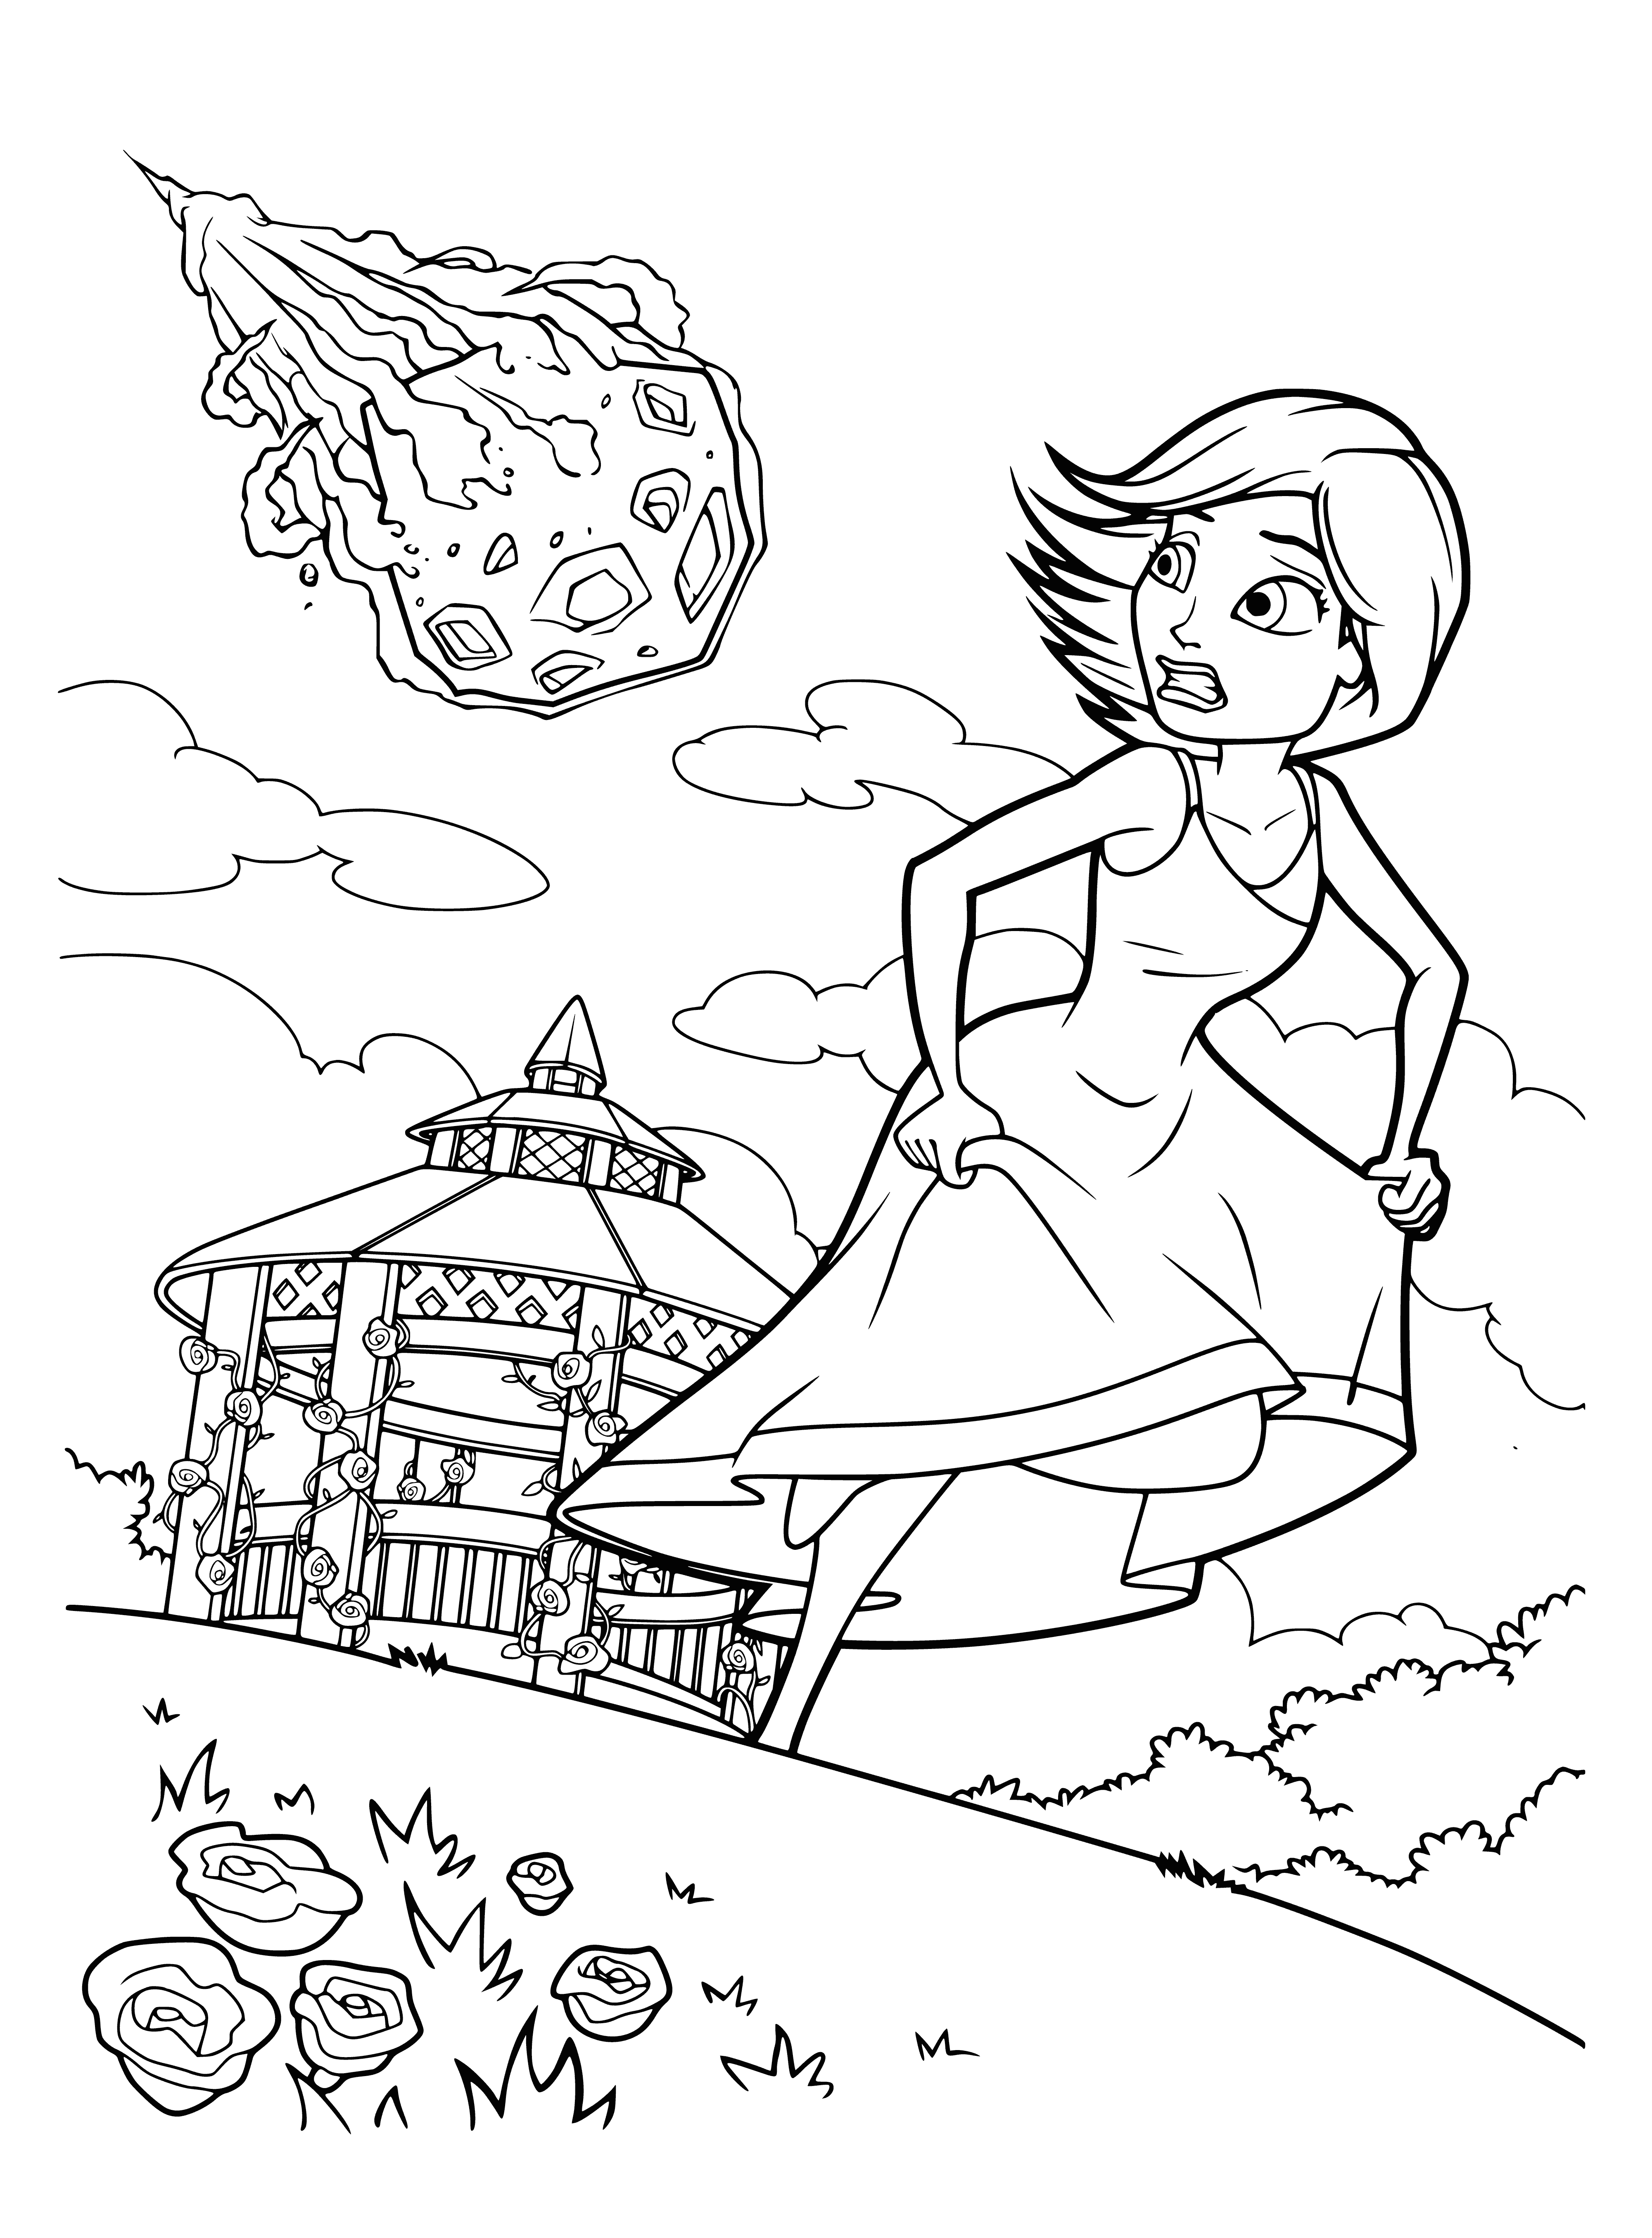 coloring page: President & advisers (an alien/monster) worry as meteorite hurtles towards Earth.